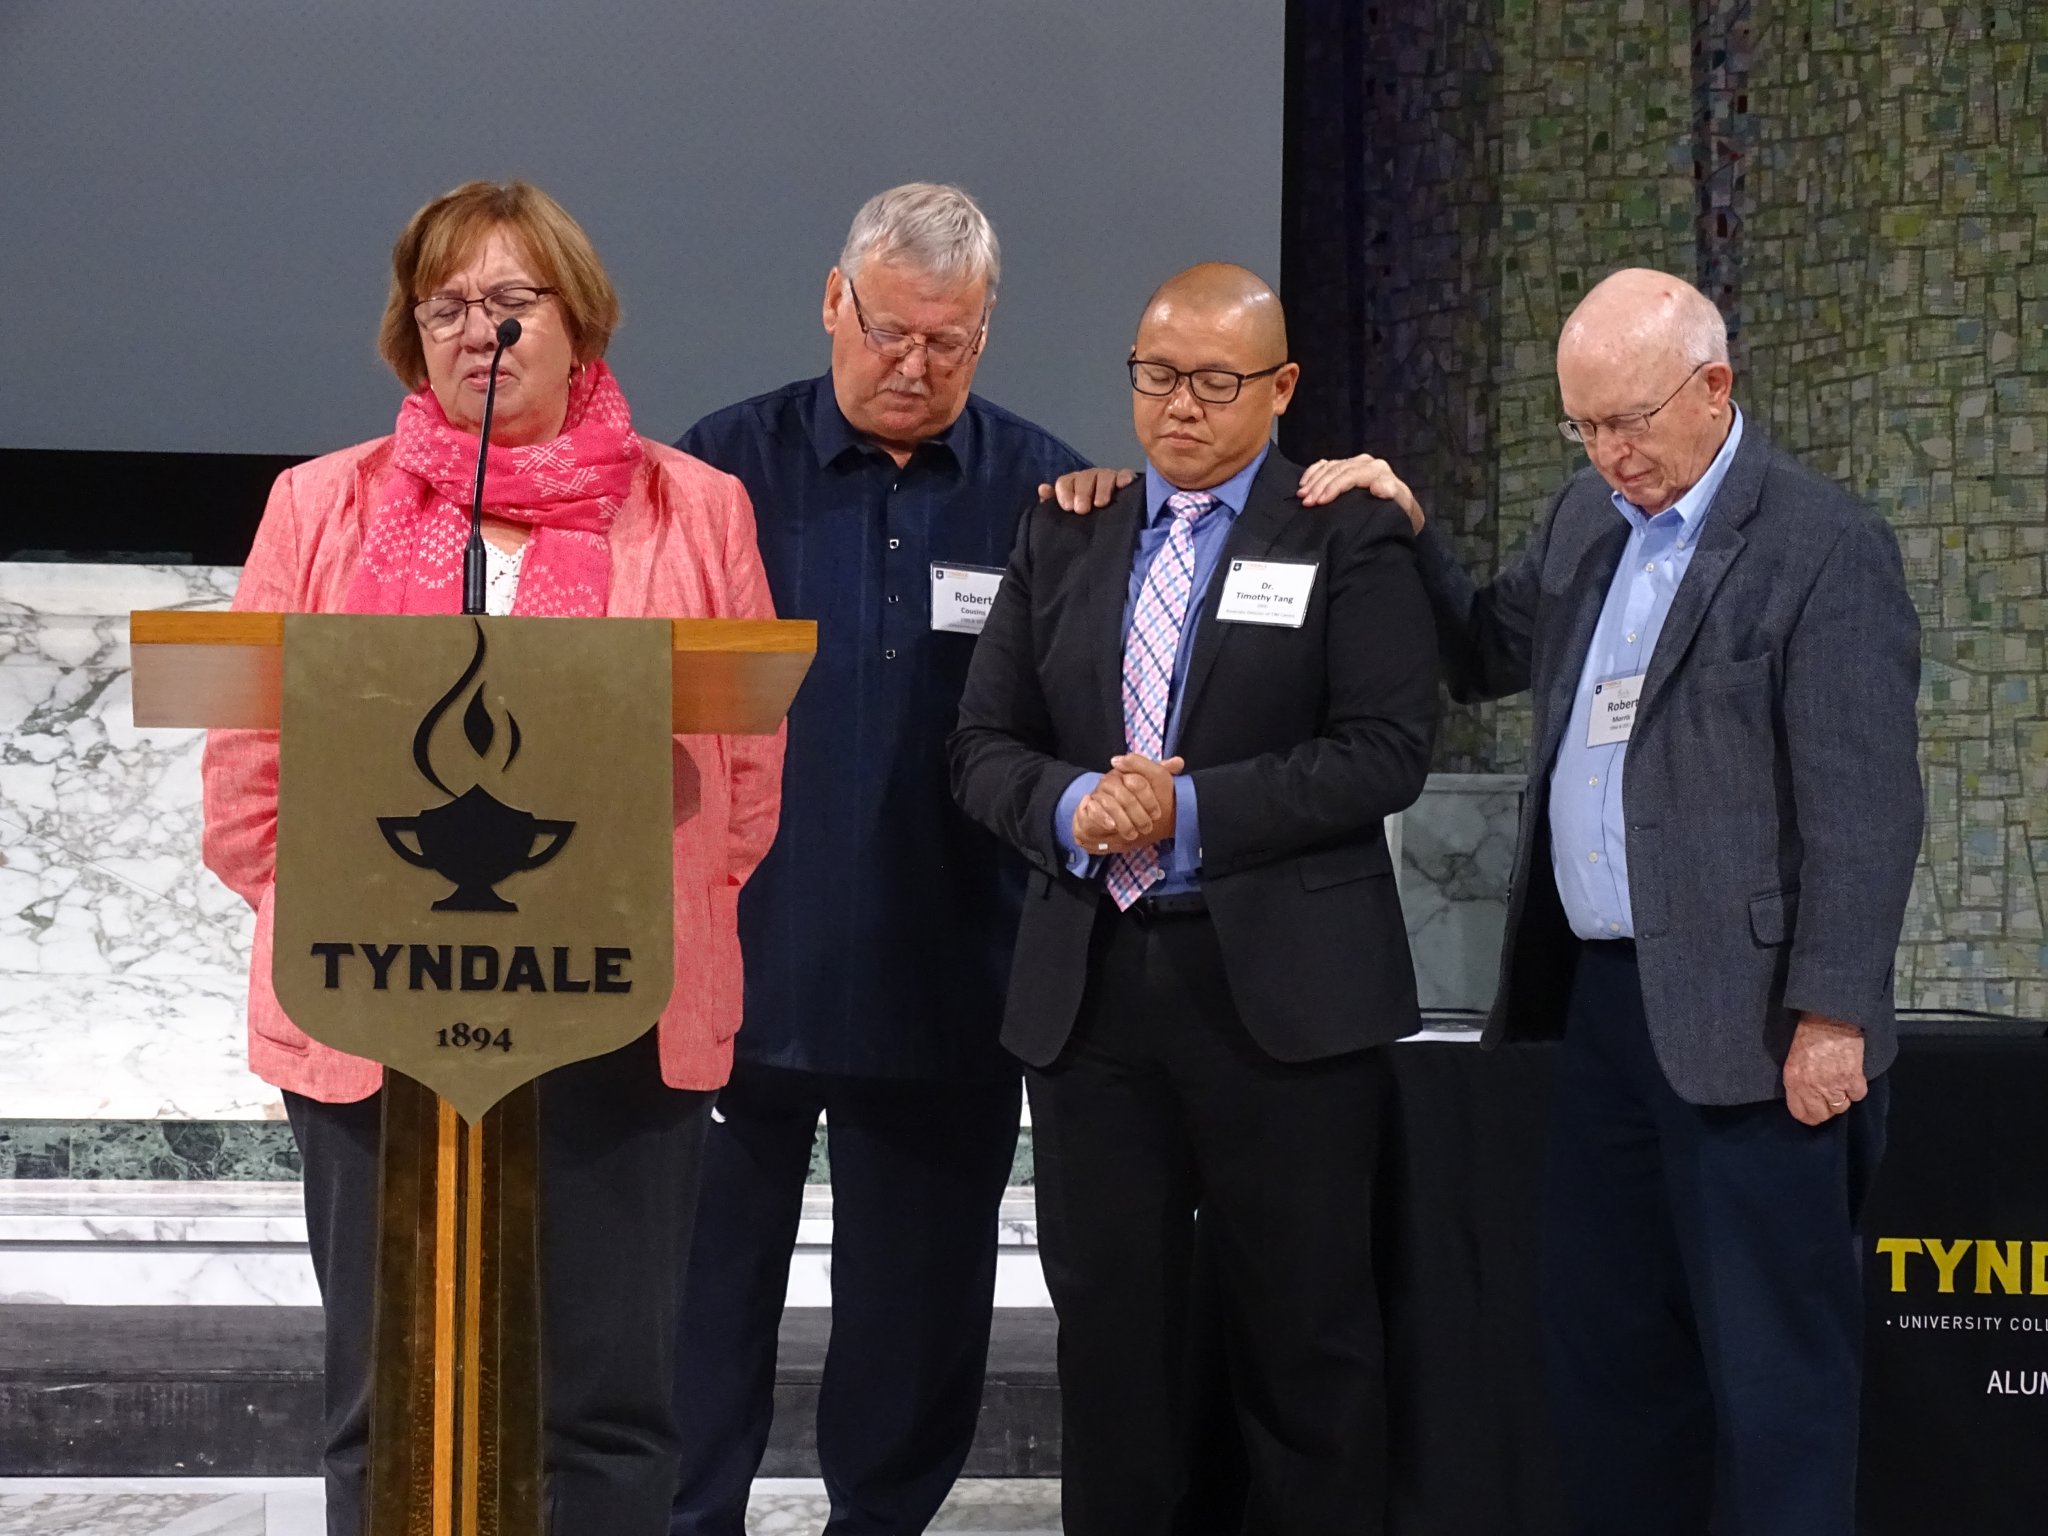 Prayer for Dr. Timothy Tang (new TIM Centre Director)